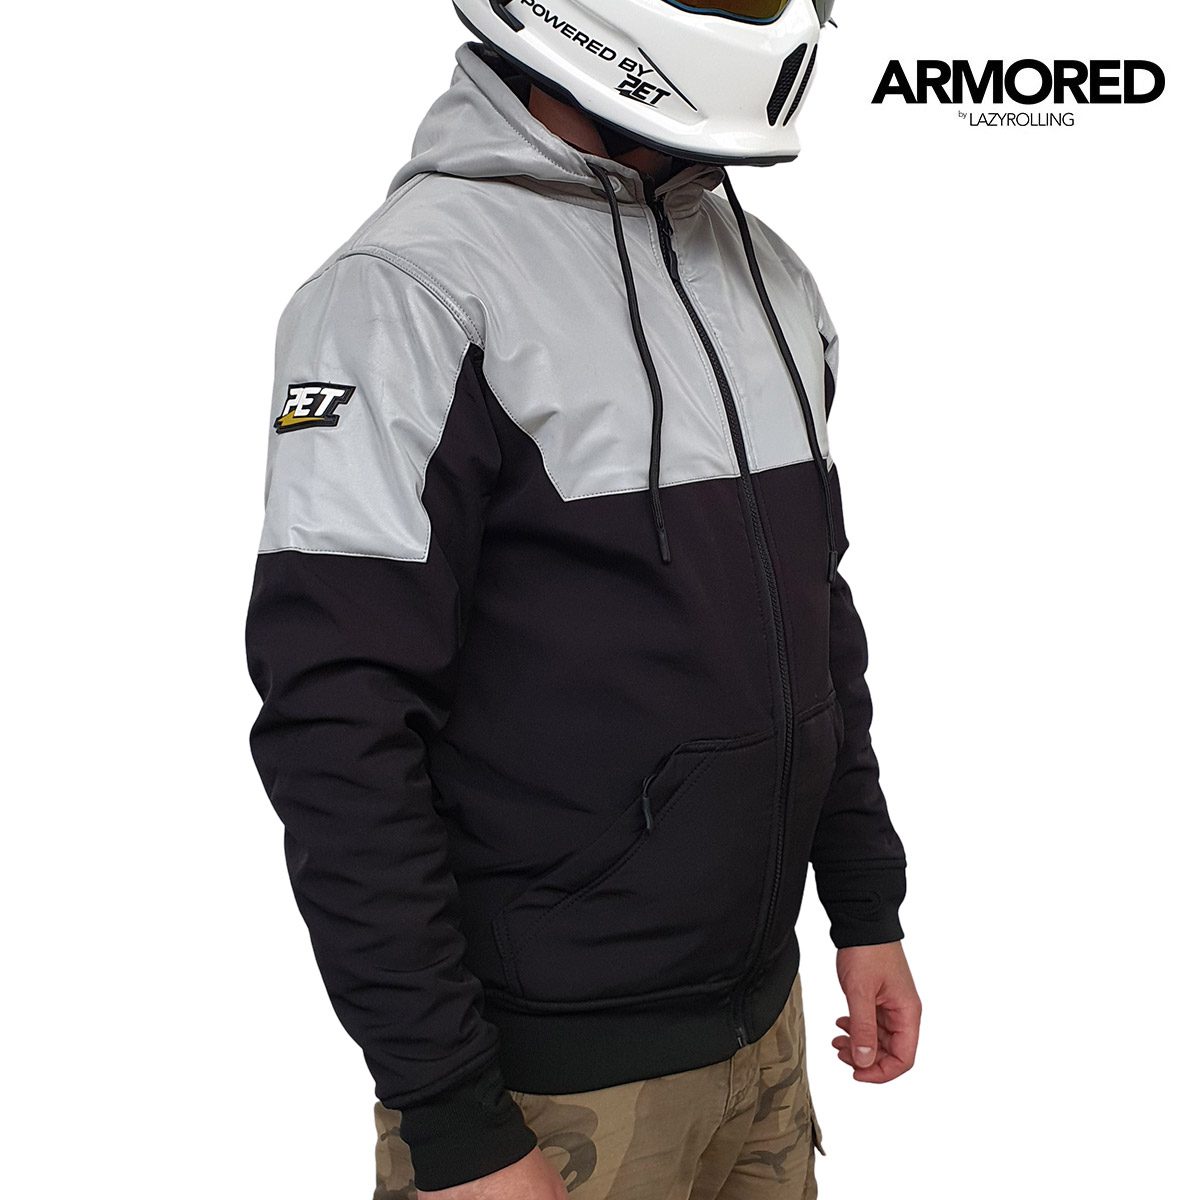 ARMORED x PET Reflective Jacket by Lazyrolling